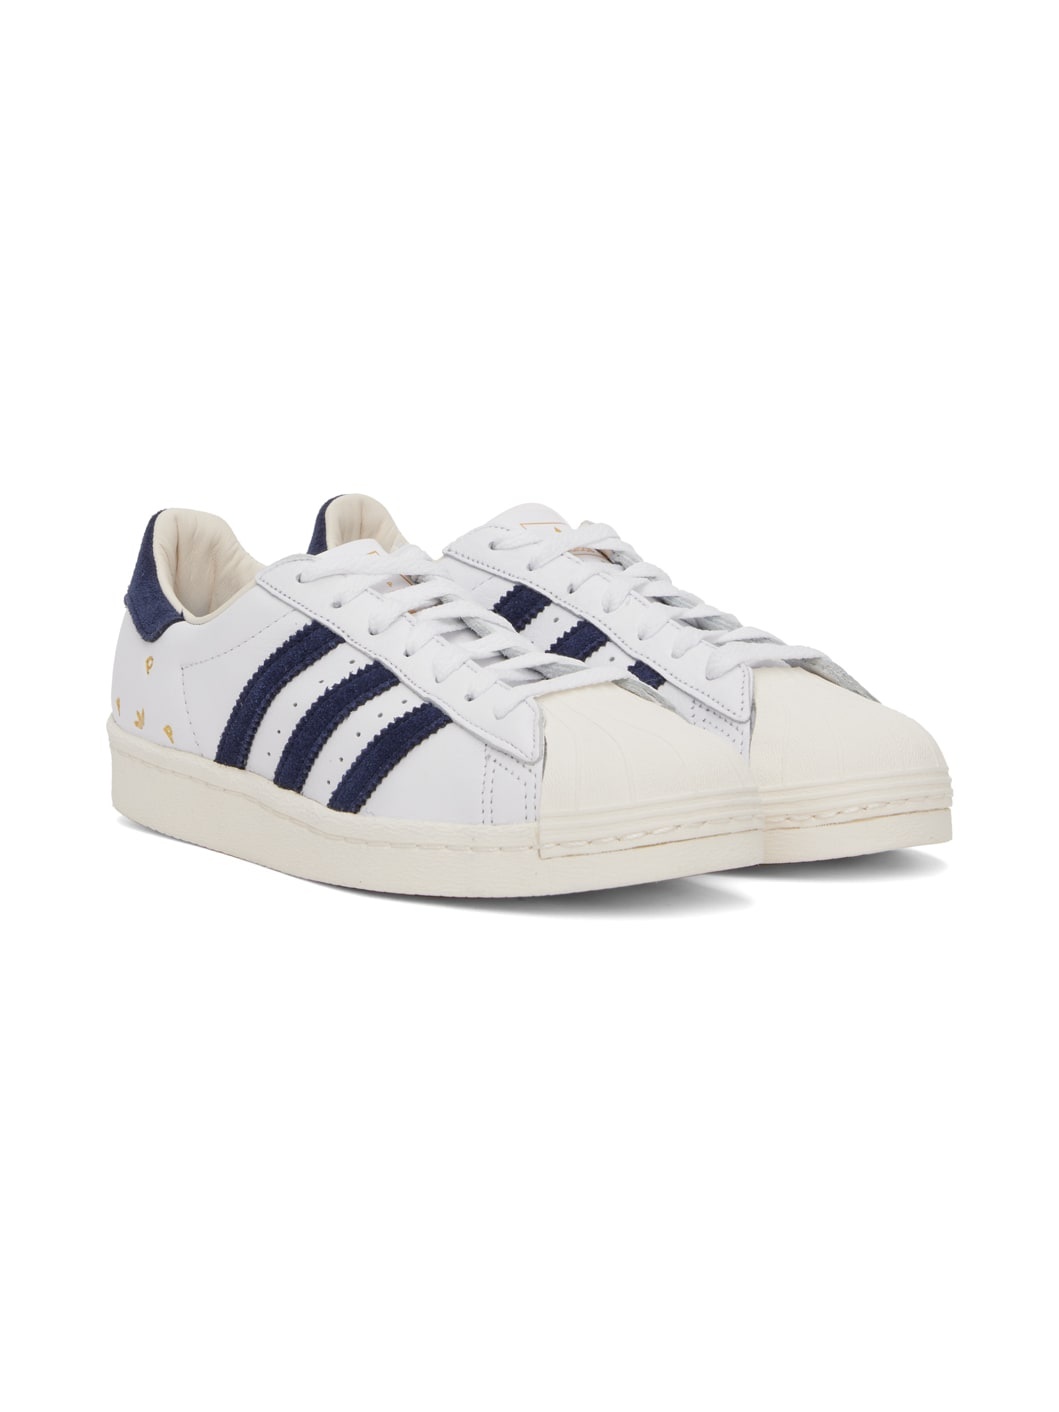 White & Navy Pop Trading Company Edition Superstar ADV Sneakers - 4